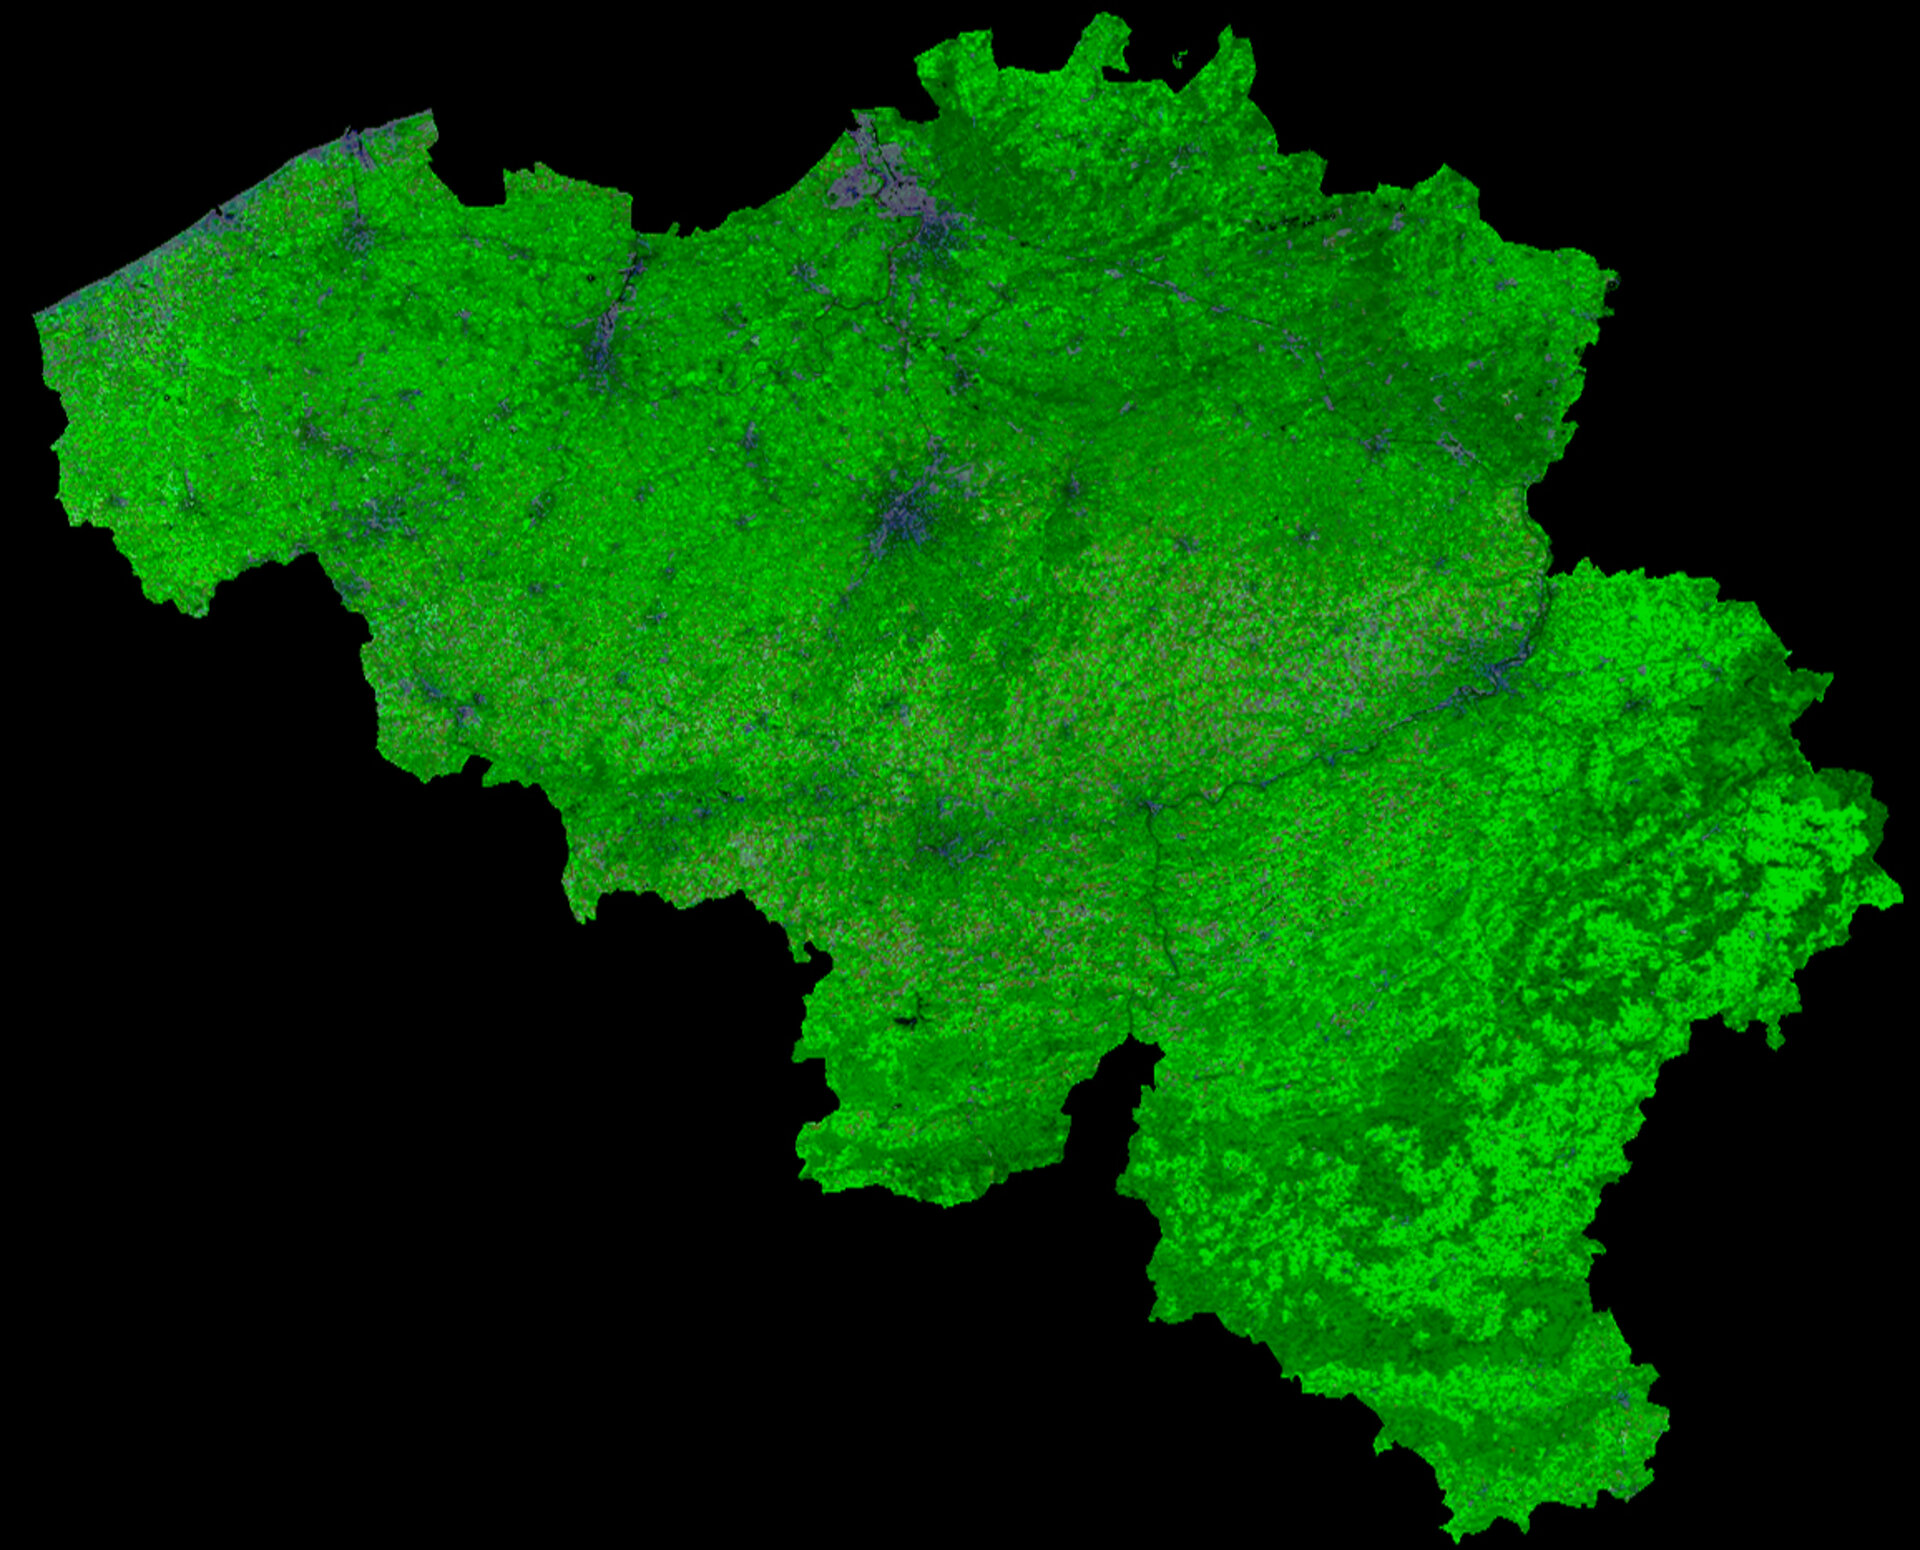 A cloud-free image of Belgium, acquired by ESA's Proba-V satellite